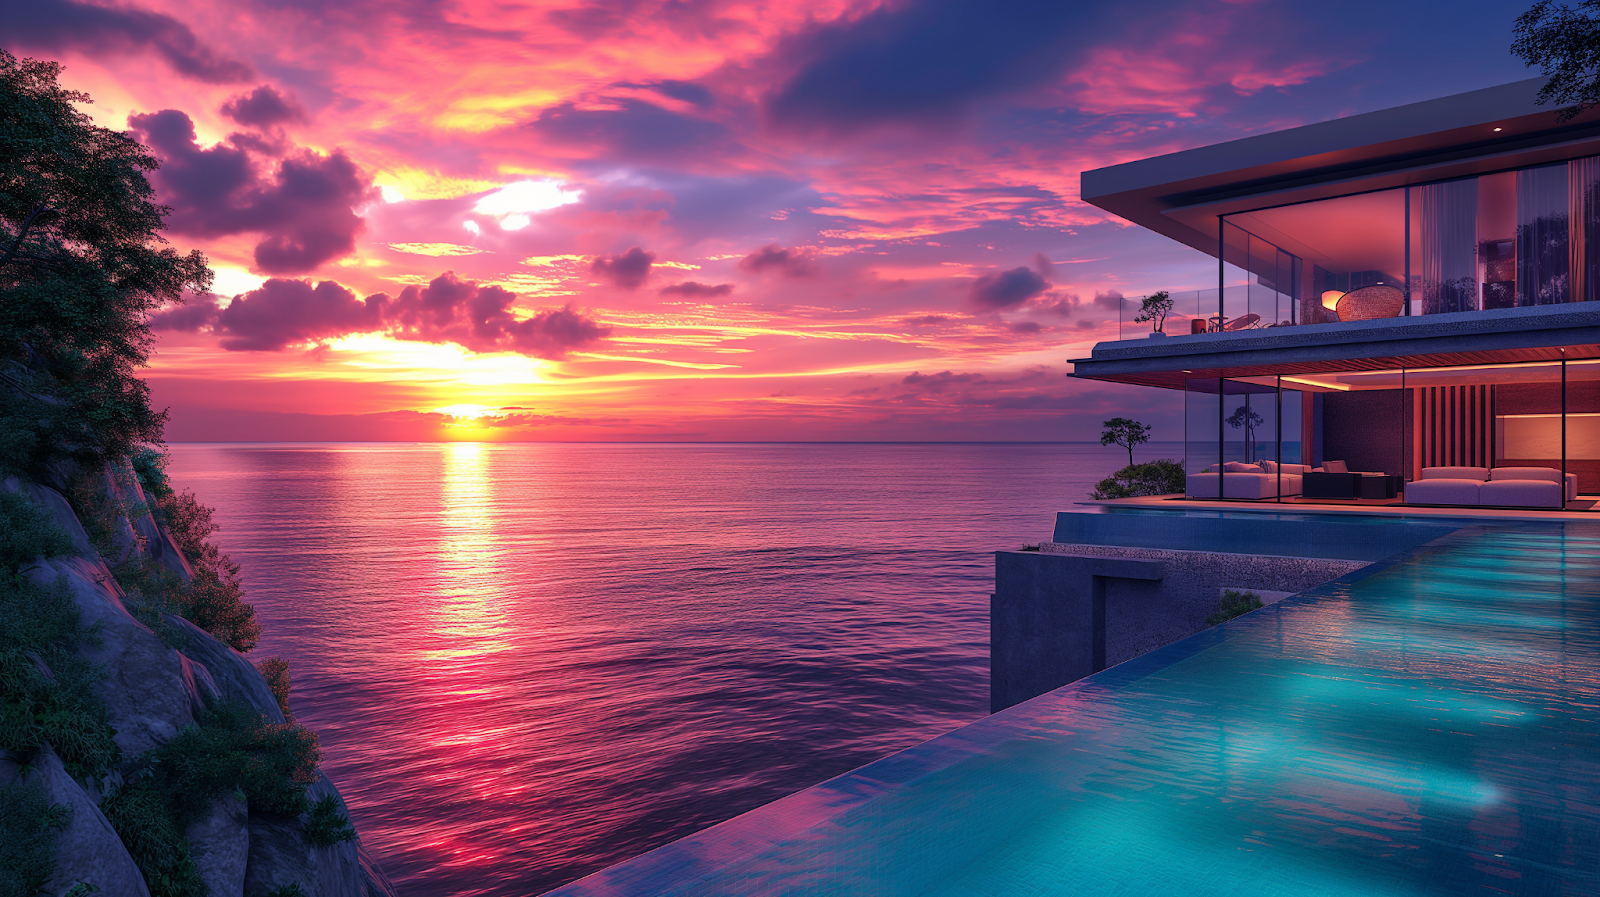 Luxurious beachfront villa with infinity pool at sunset in Mexico